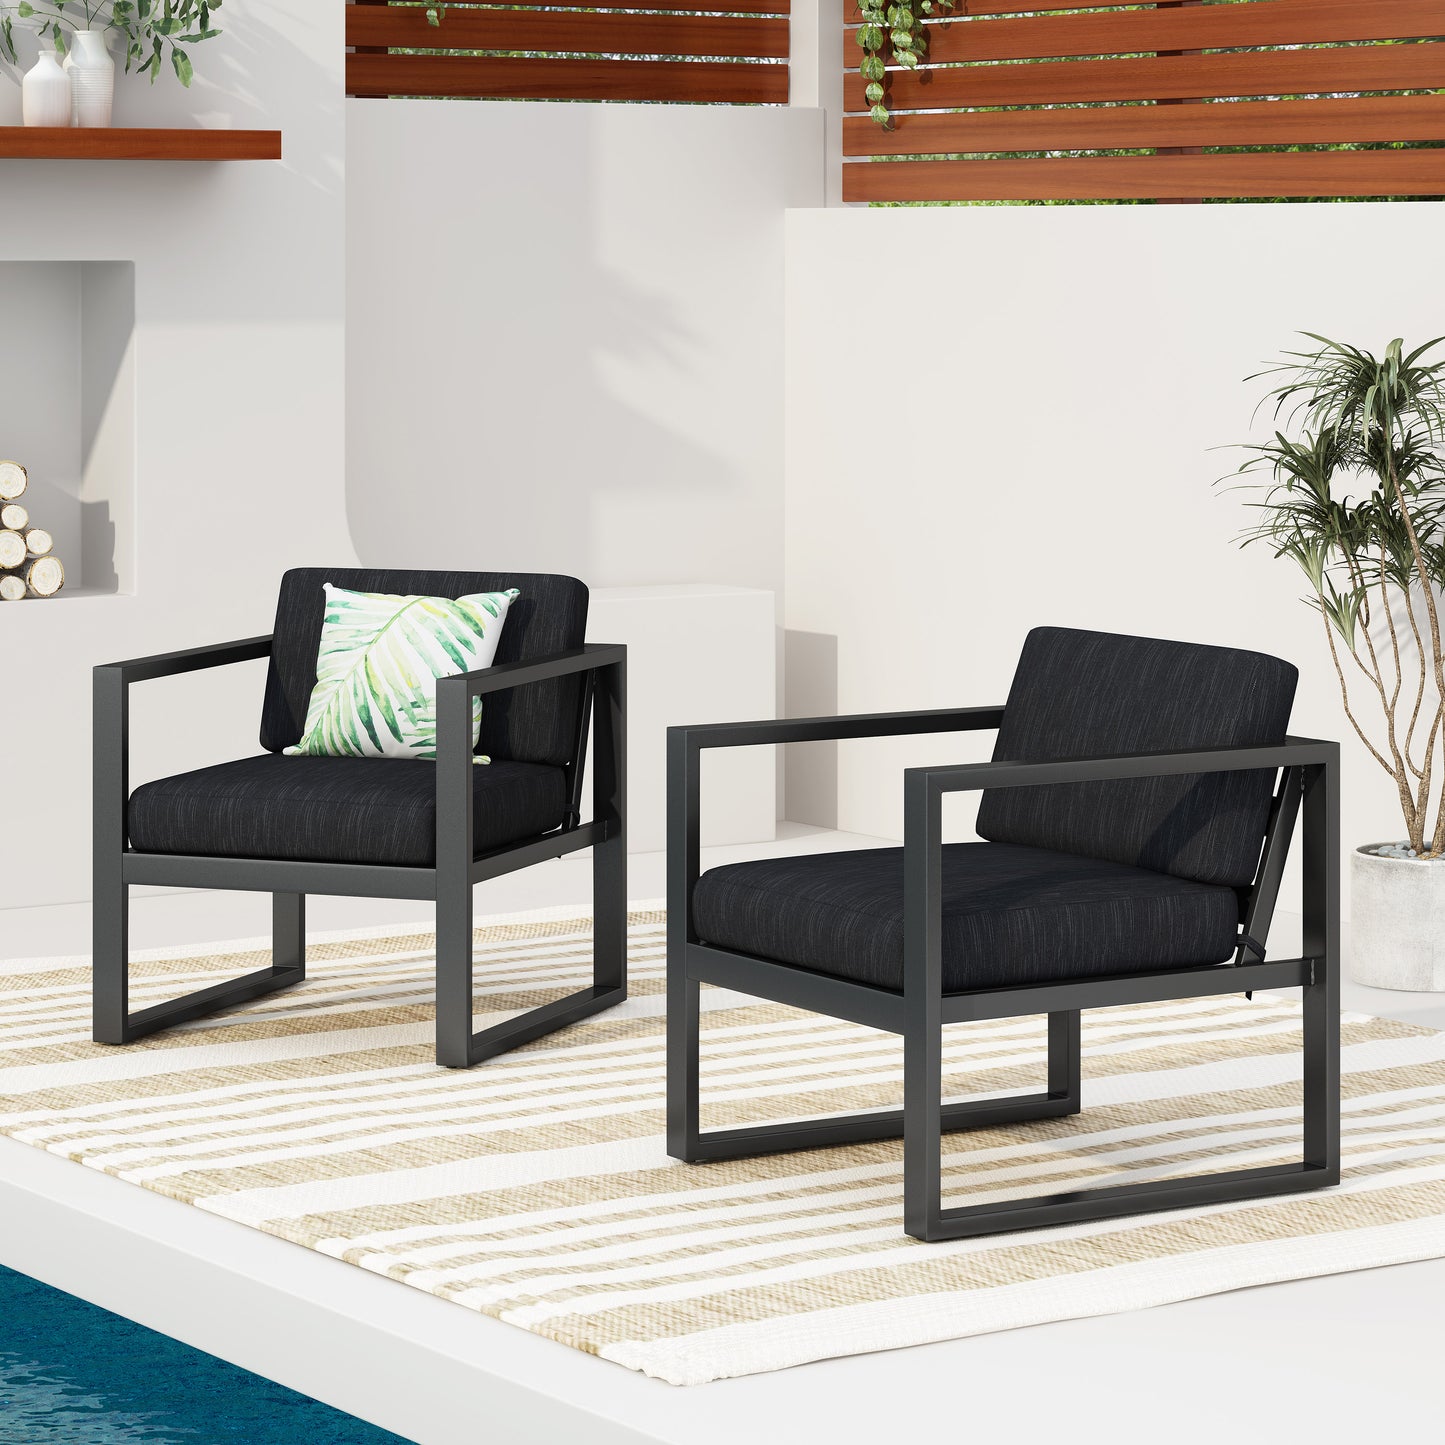 Wally Outdoor Aluminum Club Chairs